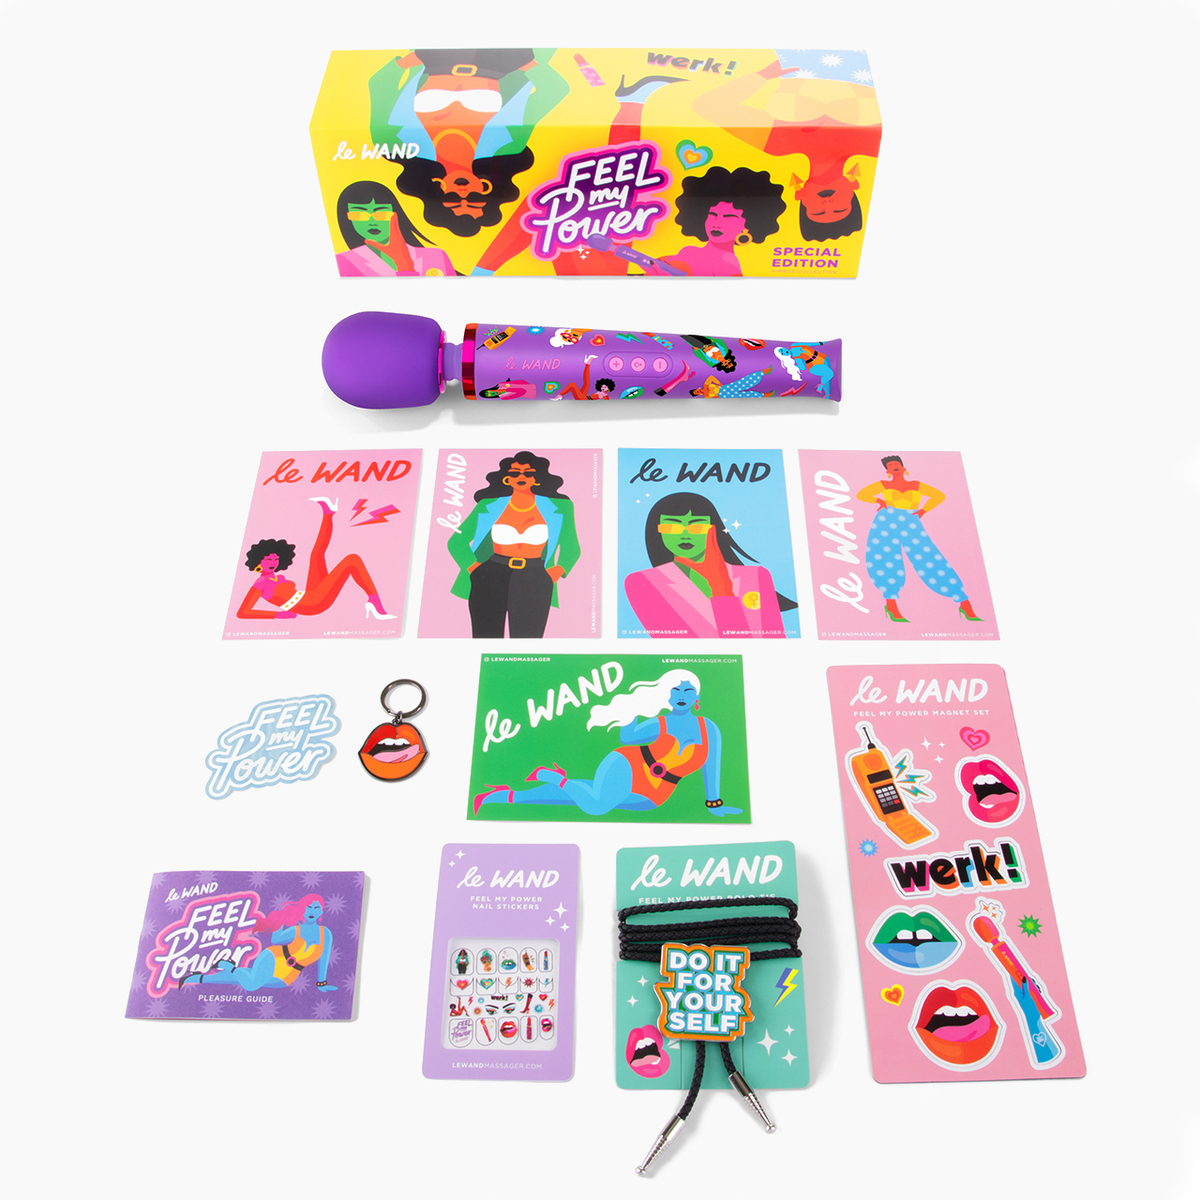 Le Wand Feel My Power Swag Pack